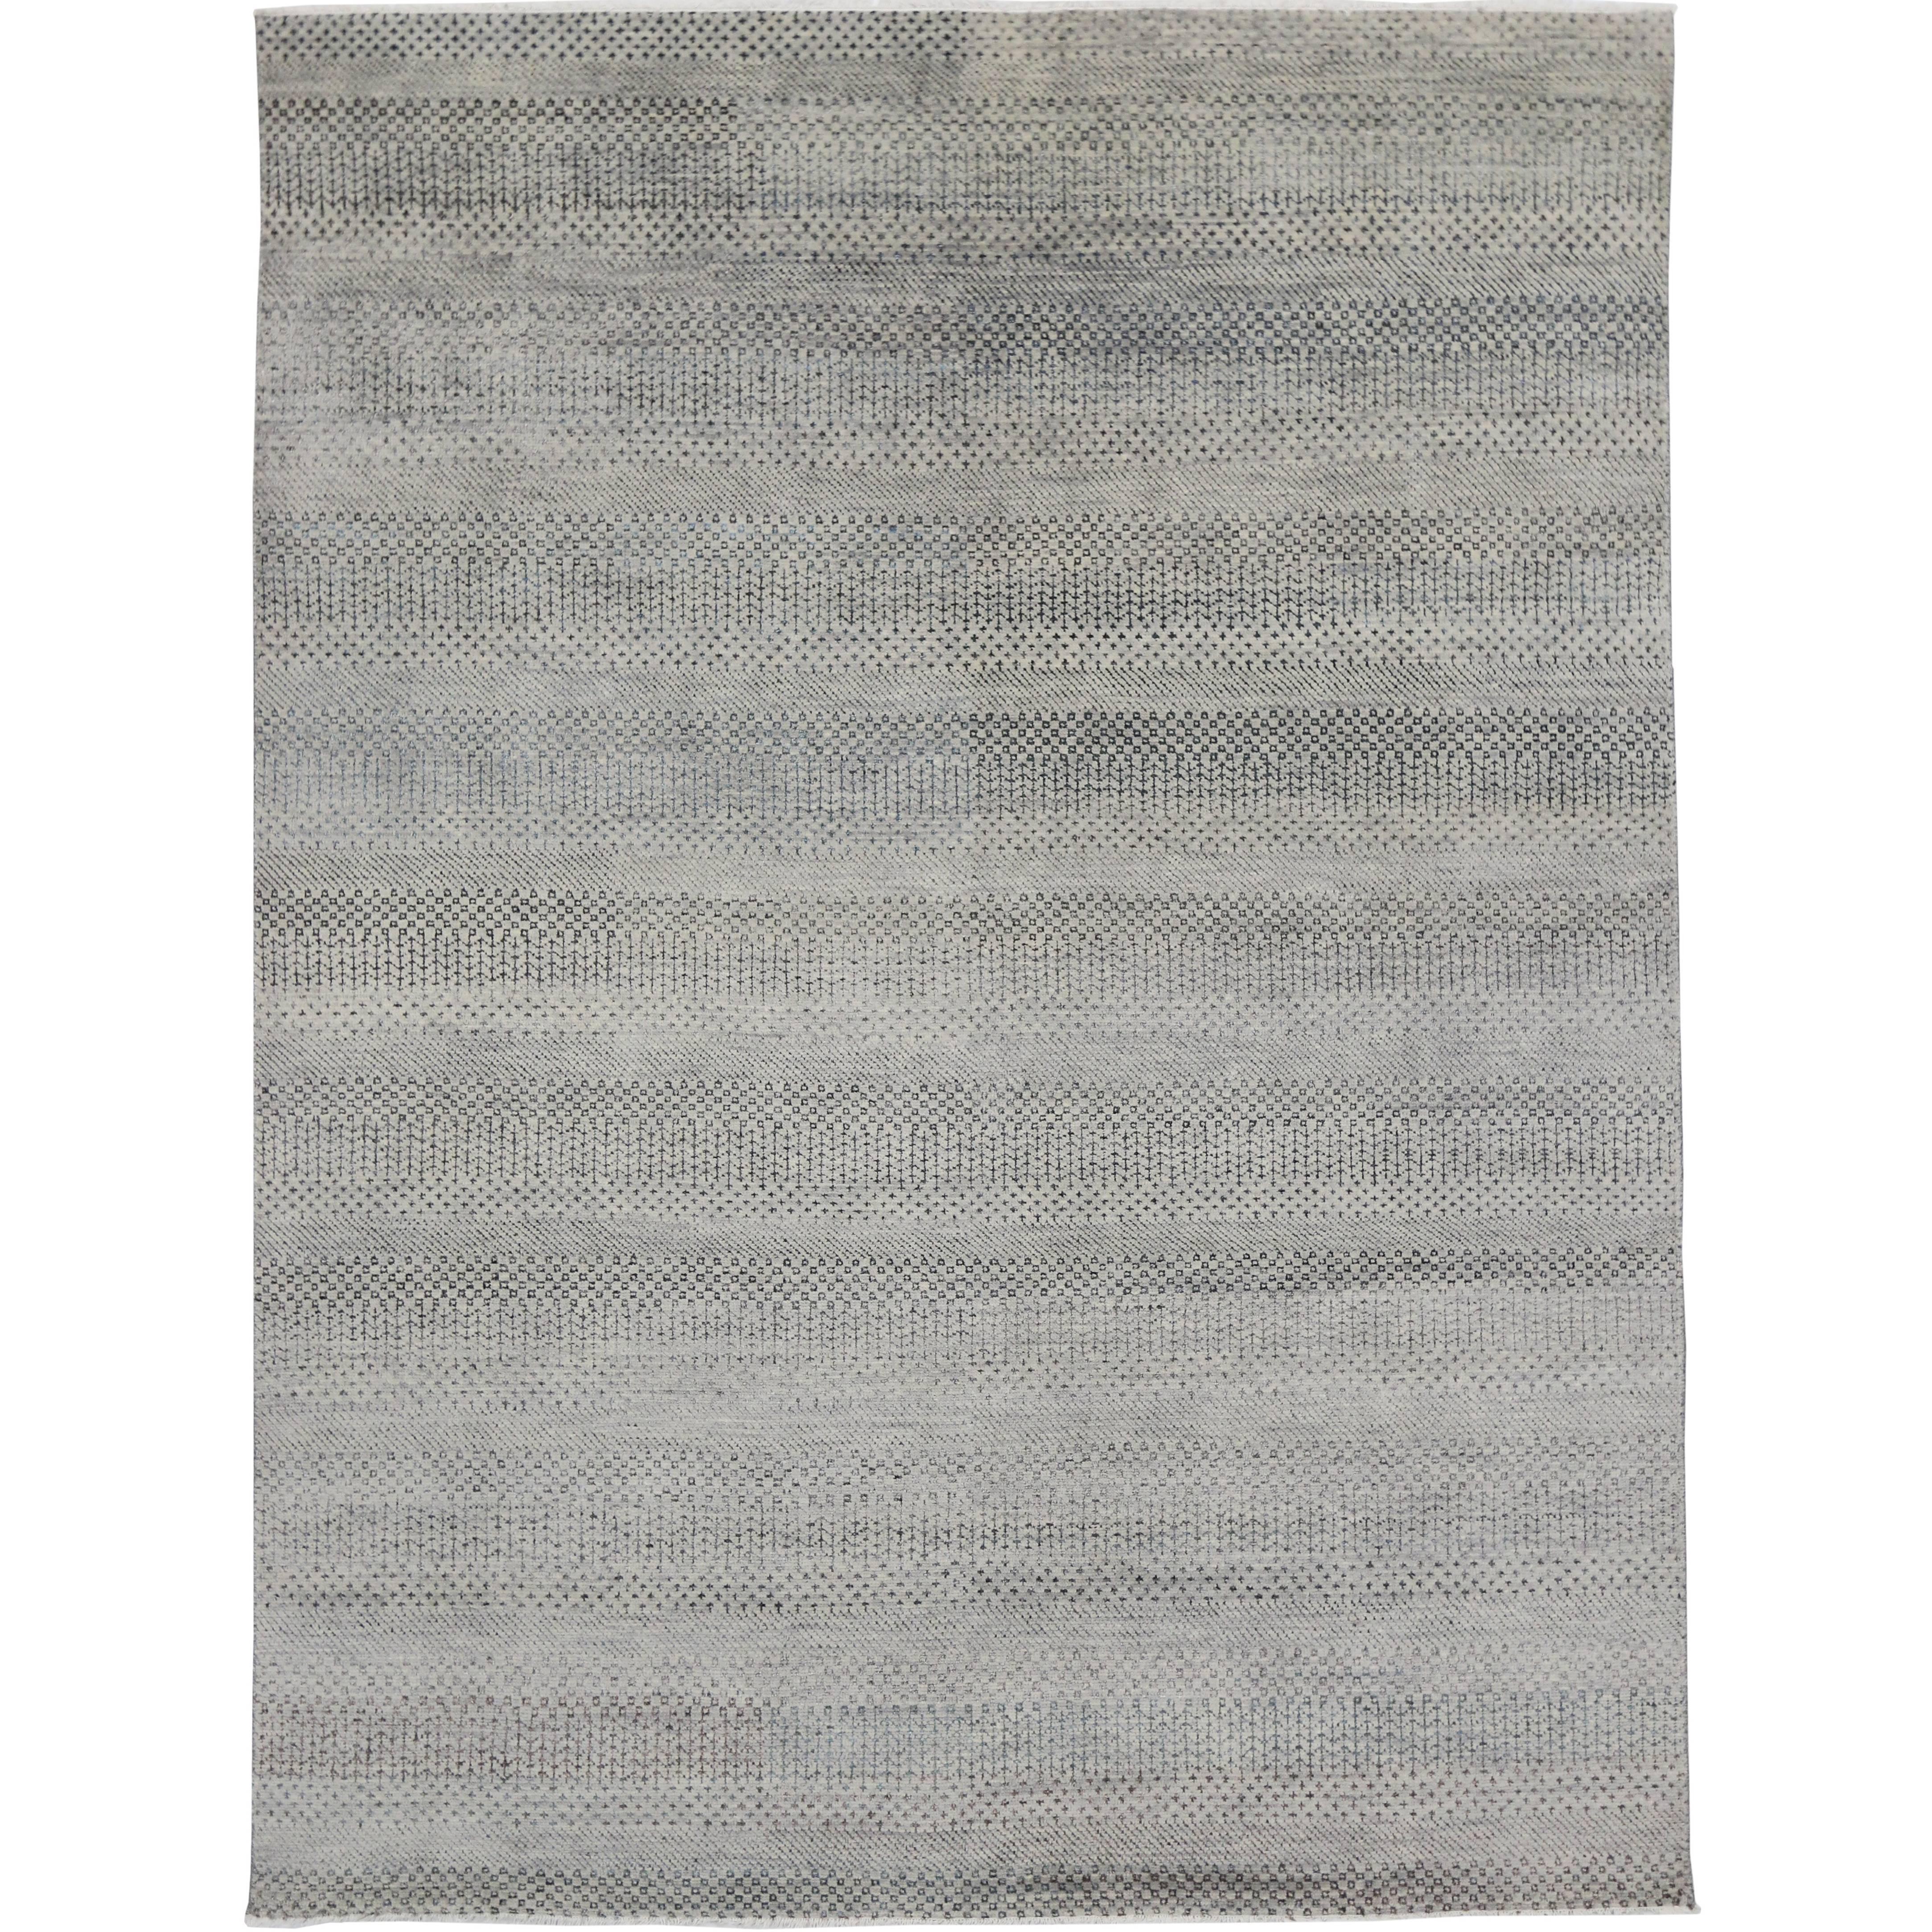 New Transitional Gray Rug with Minimalist Style, Contemporary Bauhaus Design For Sale